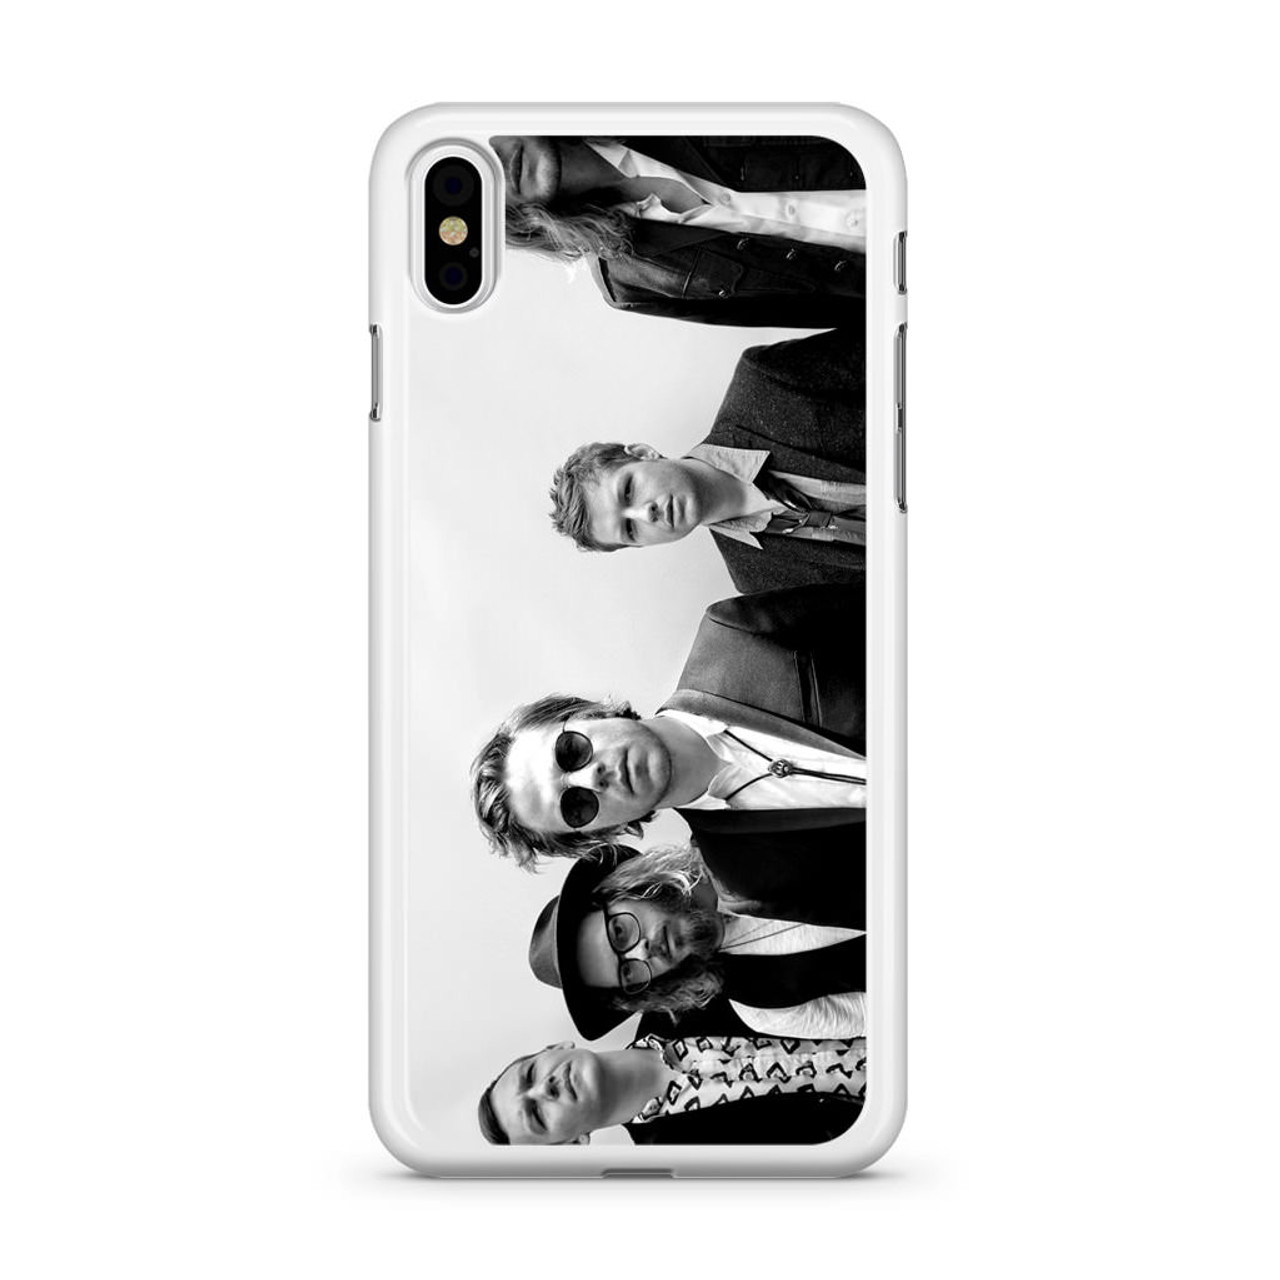 Cage the elephant wallpaper iphone xs case